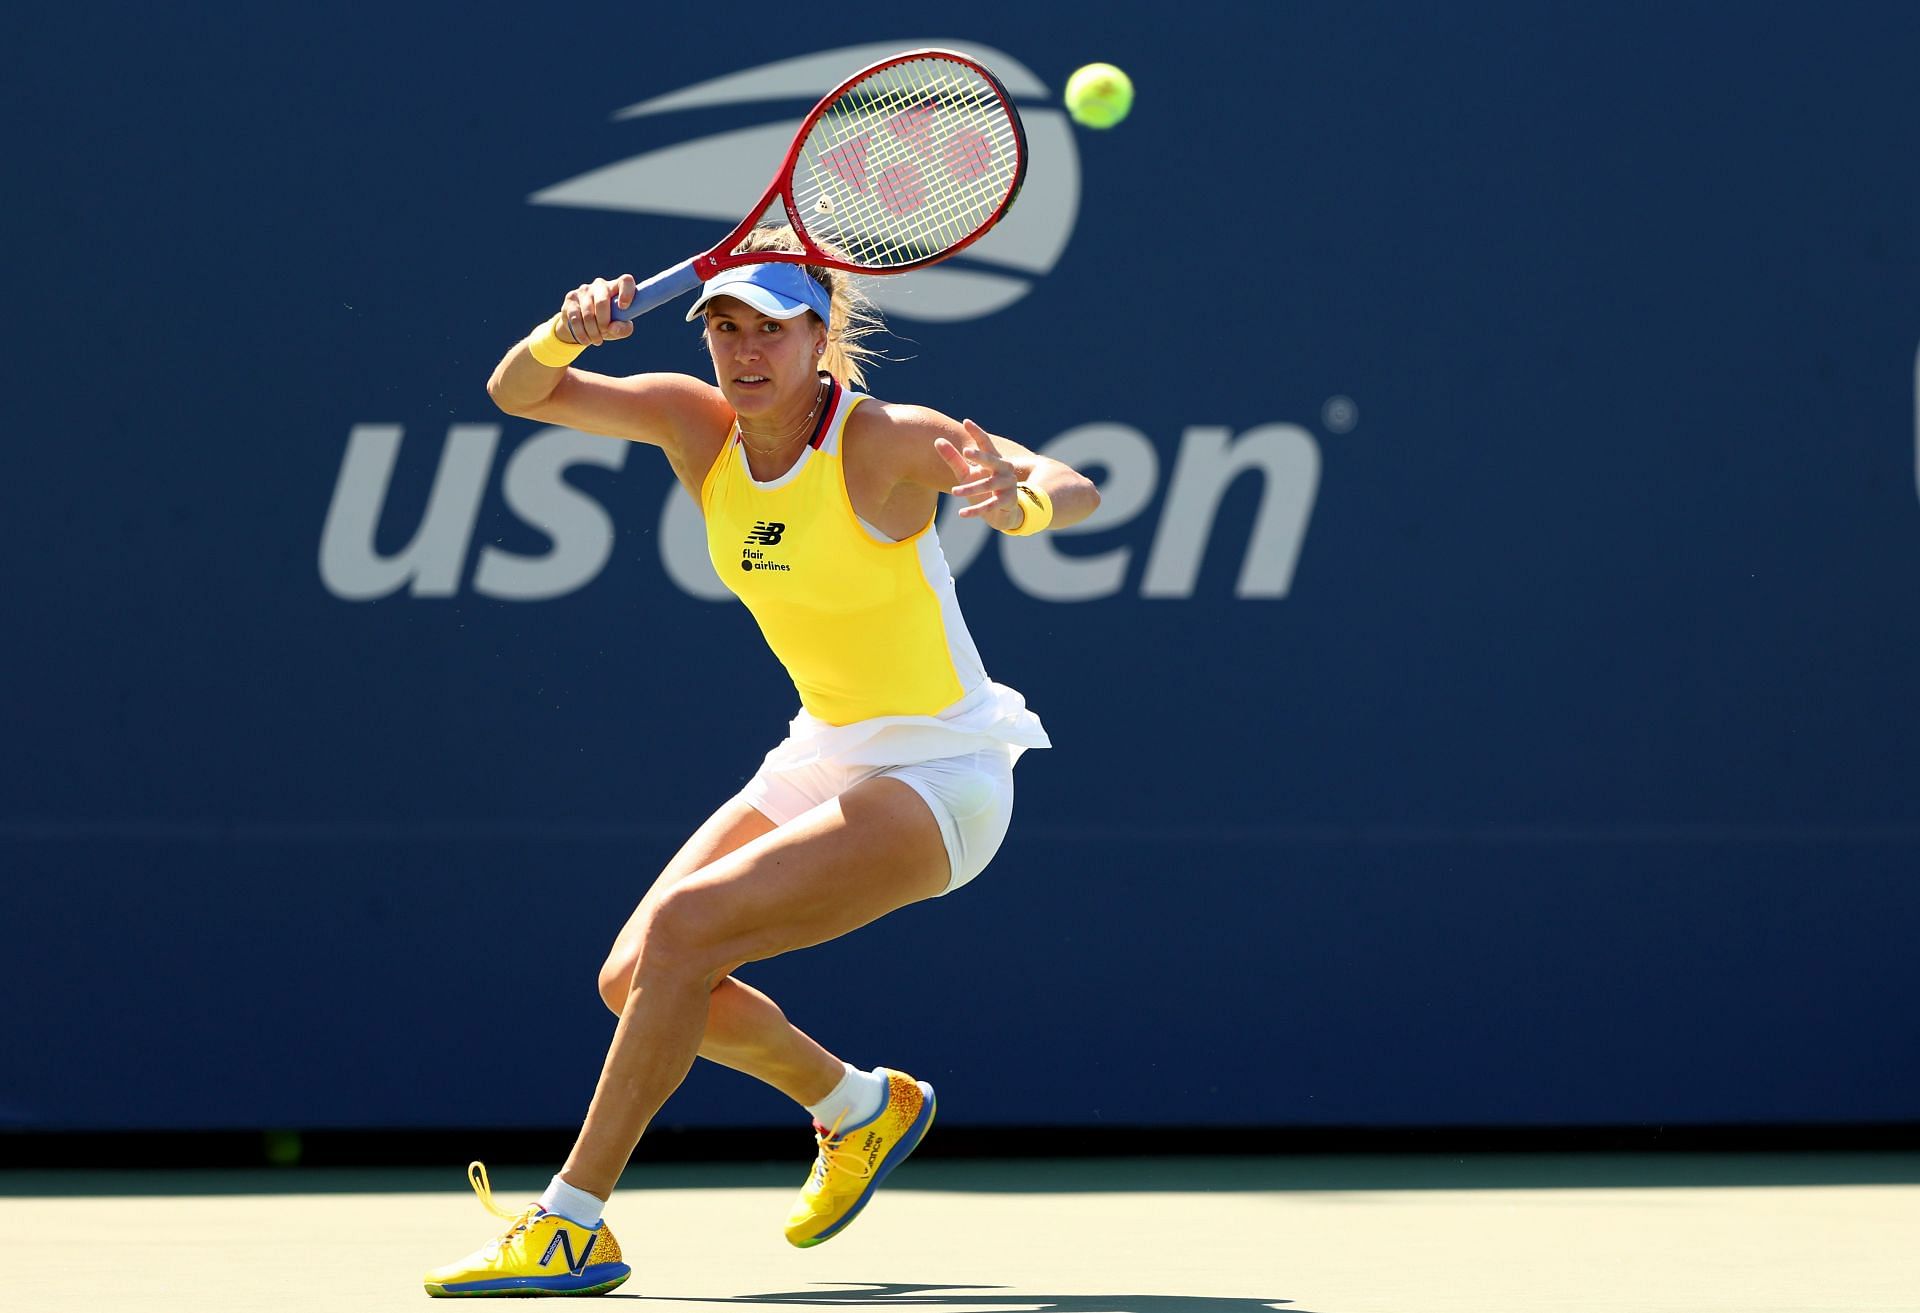 Eugenie Bouchard in action at the US Open qualifiers